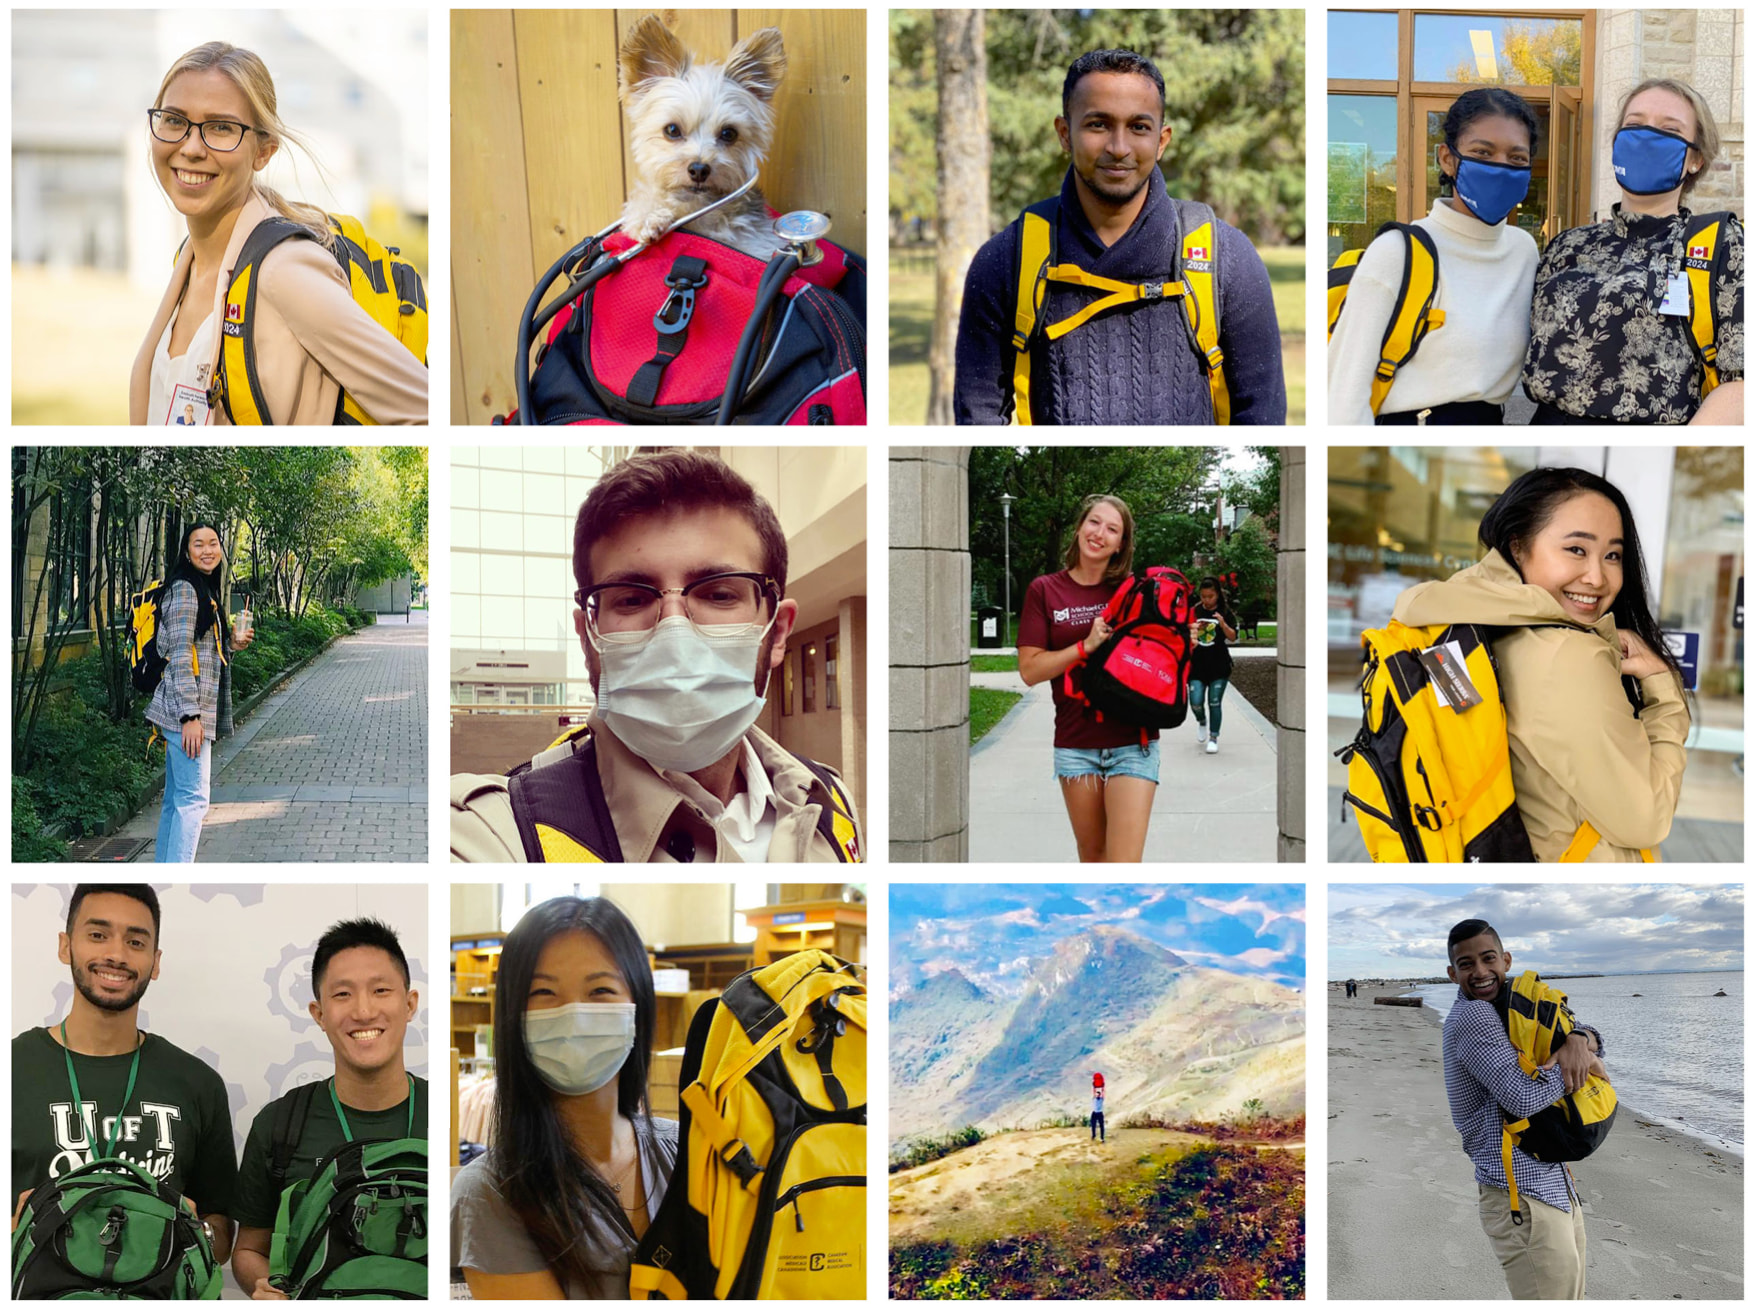 A gallery of students with their backpacks in Instagram photos